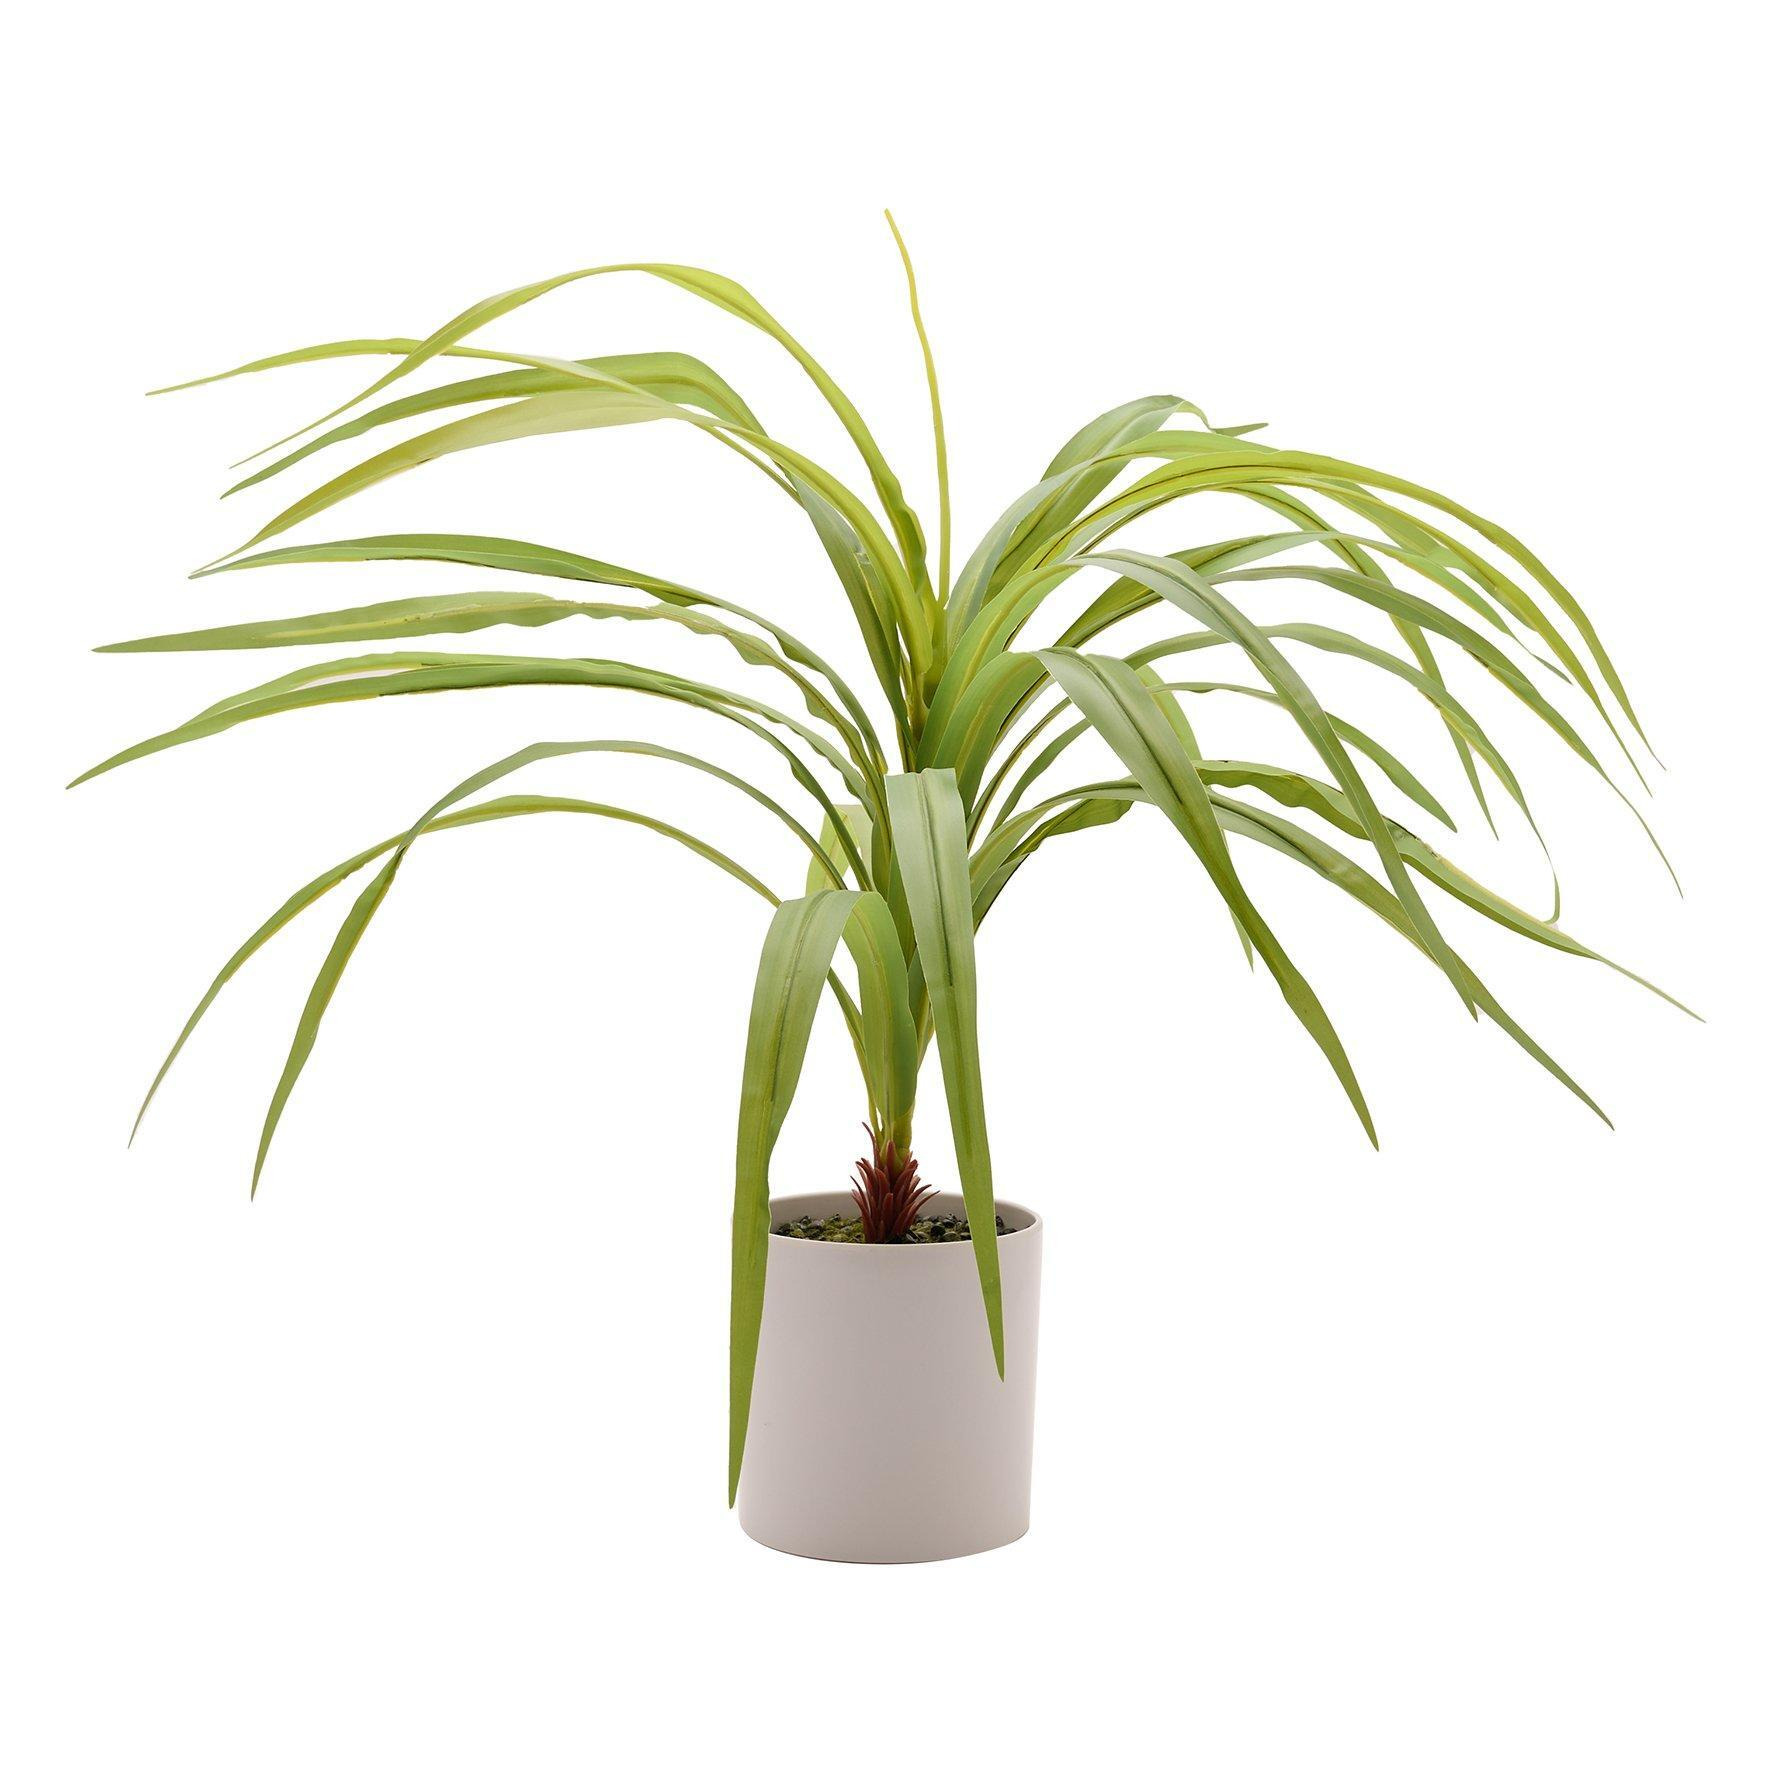 Artificial Riverside Grass Plant Potted - image 1